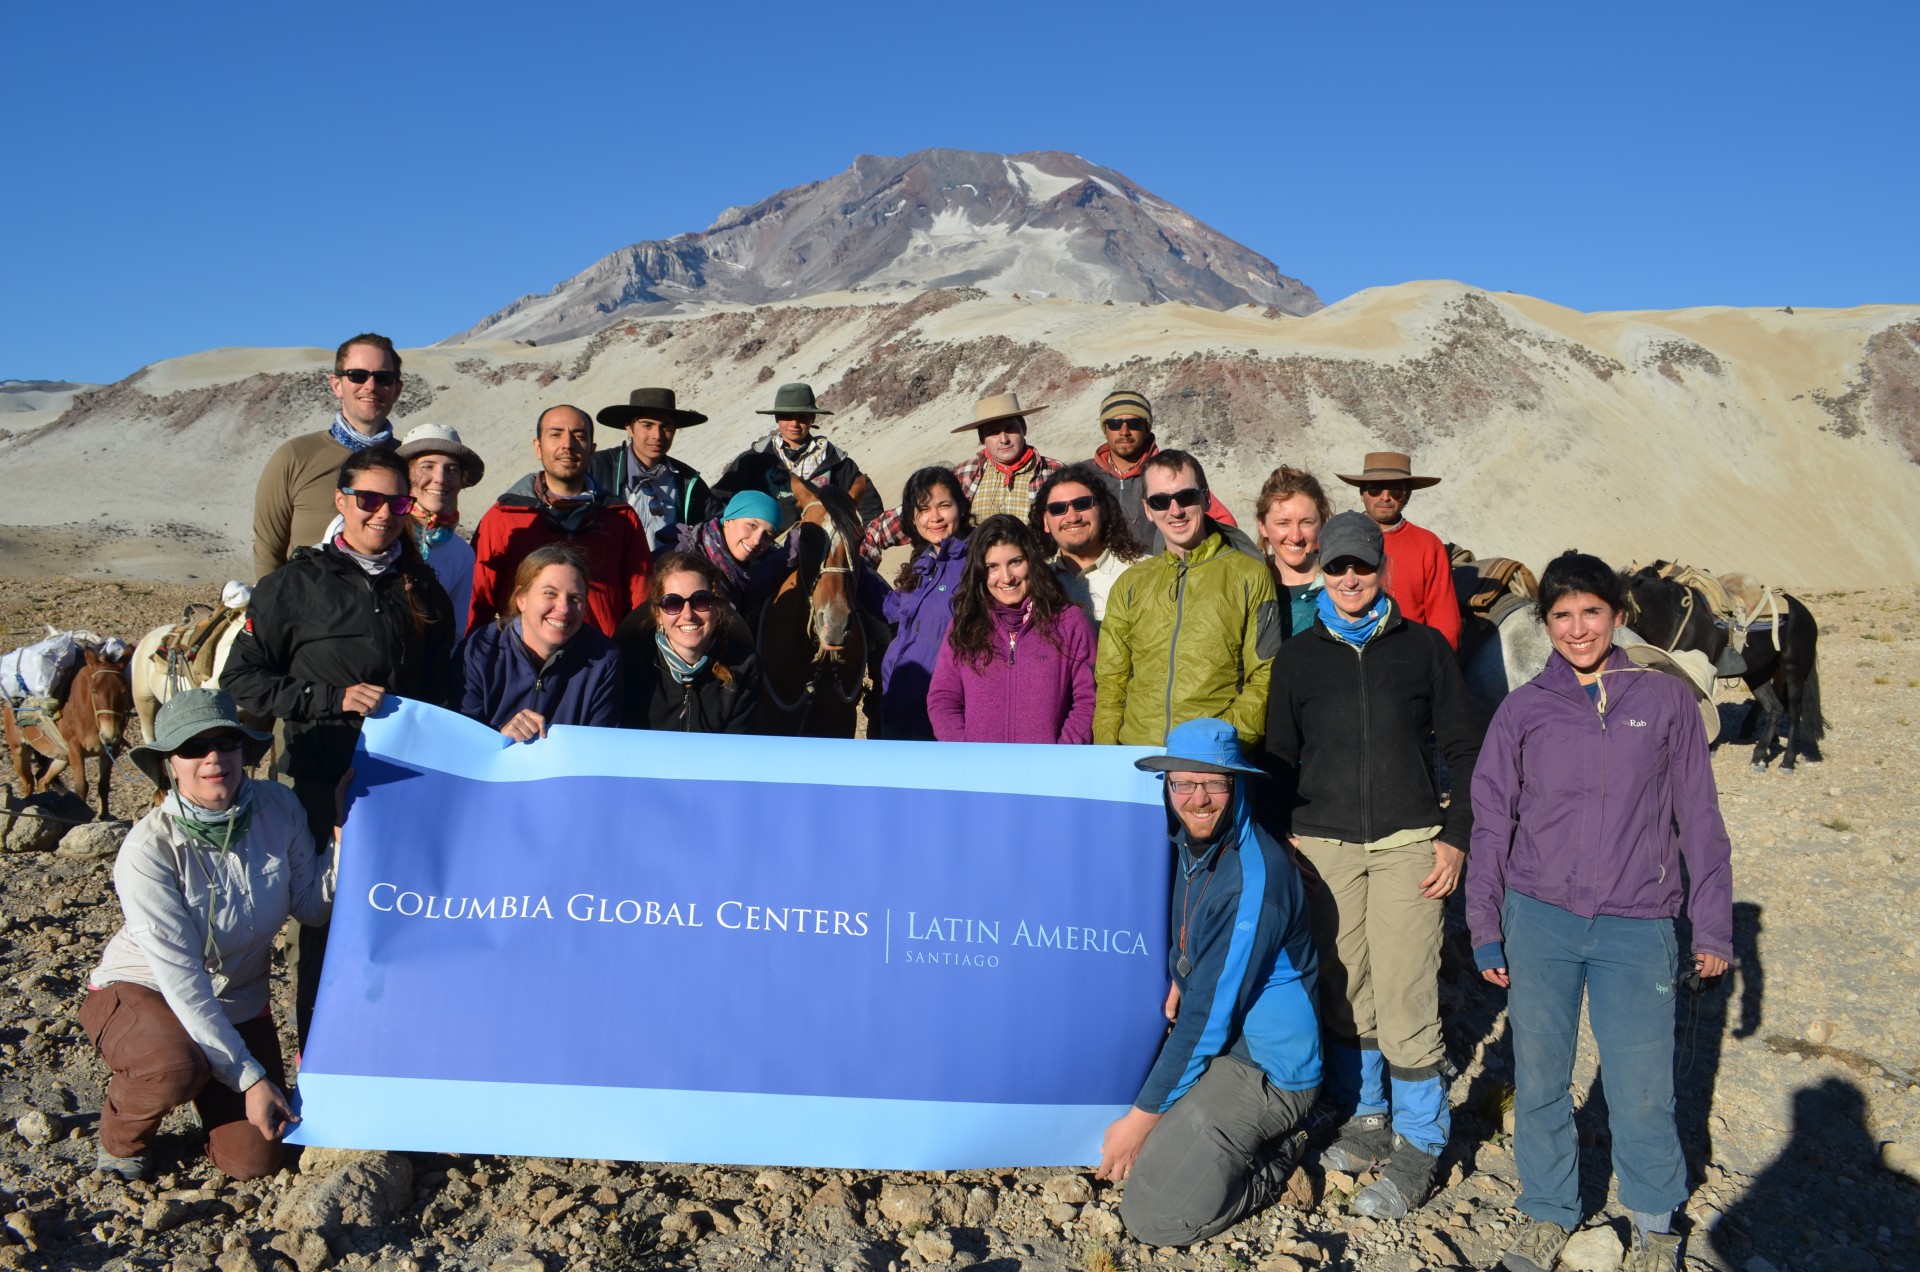 Near the foot of Descabezado Grande, a group shout-out to the Columbia Global Centers, which facilitated the expedition.